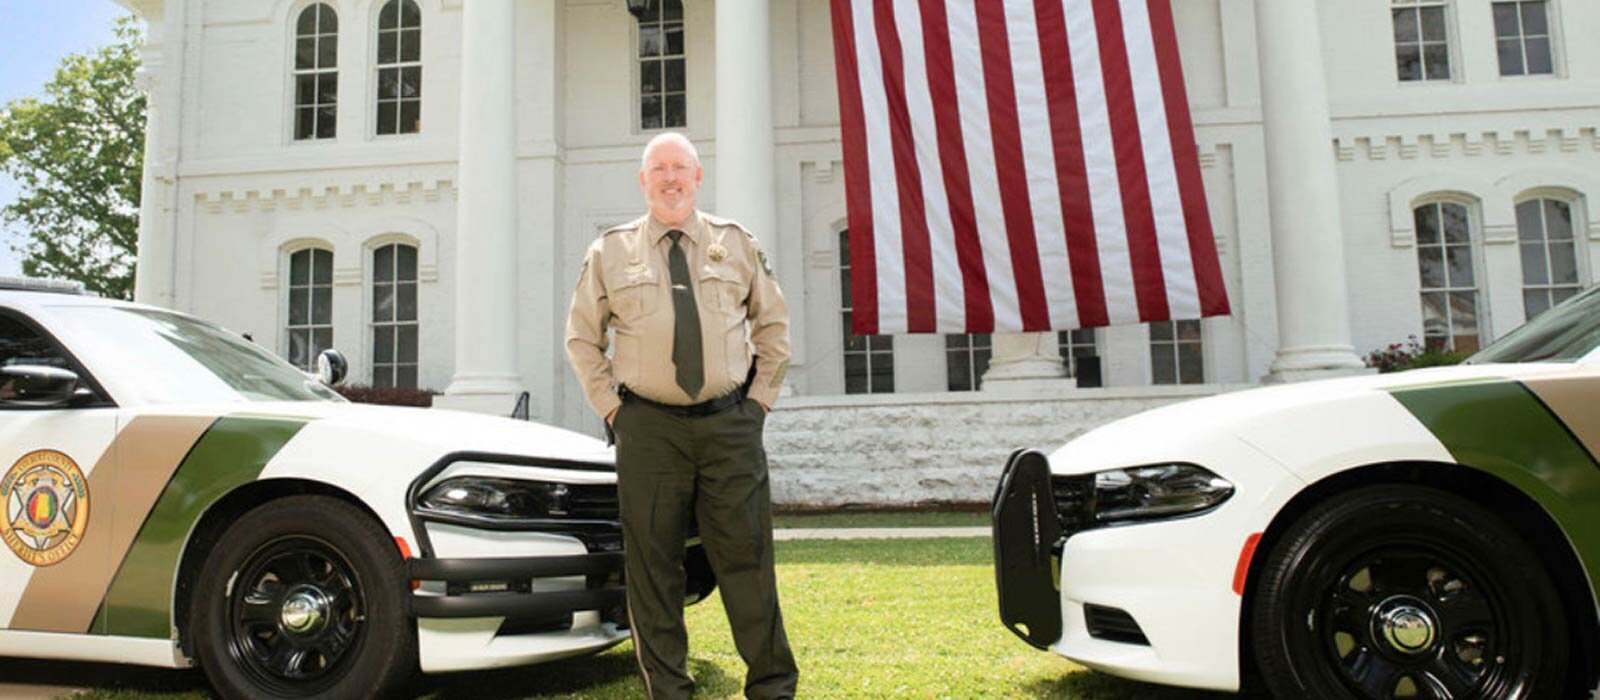 Colbert County Sheriff in front of the Courthouse.